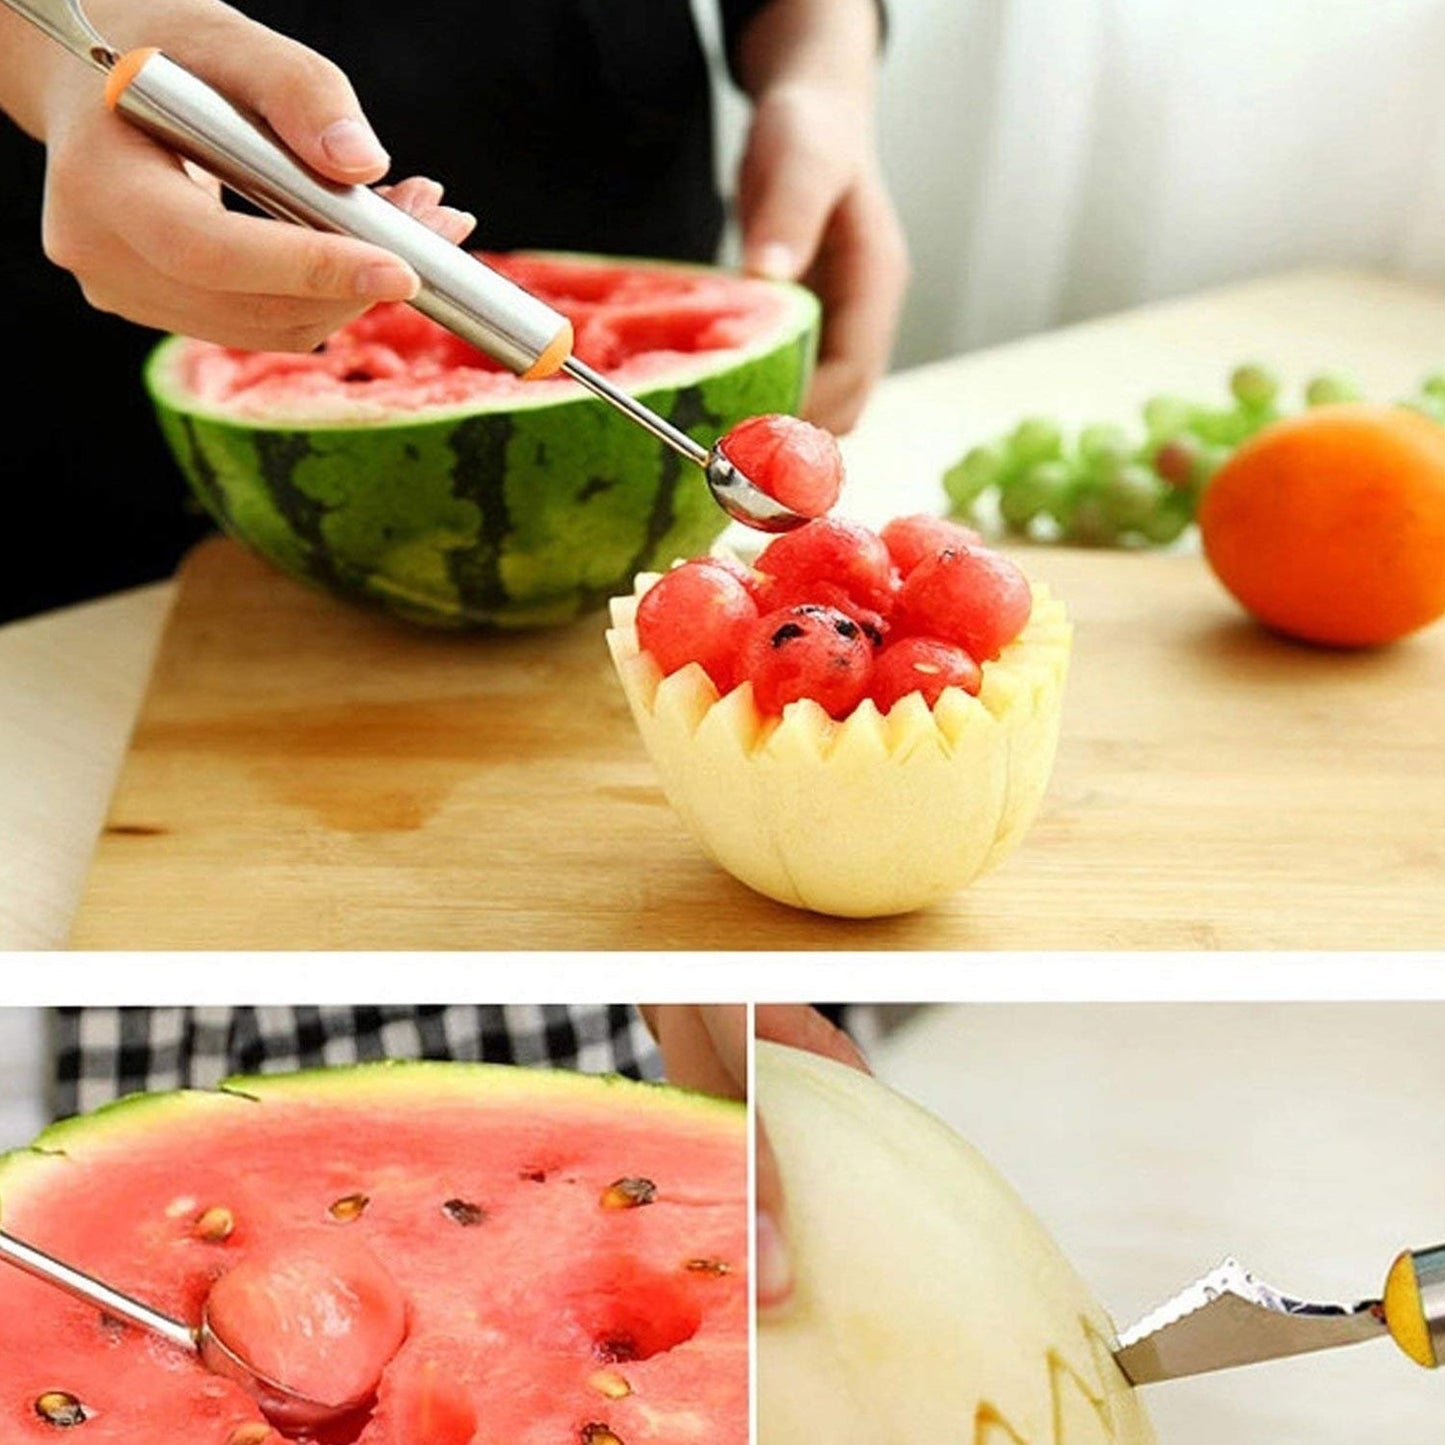 5335 Multifunctional 2 in 1 Melon Baller - Stainless Steel Dig Scoop with Fruit Carving Knife. JK Trends